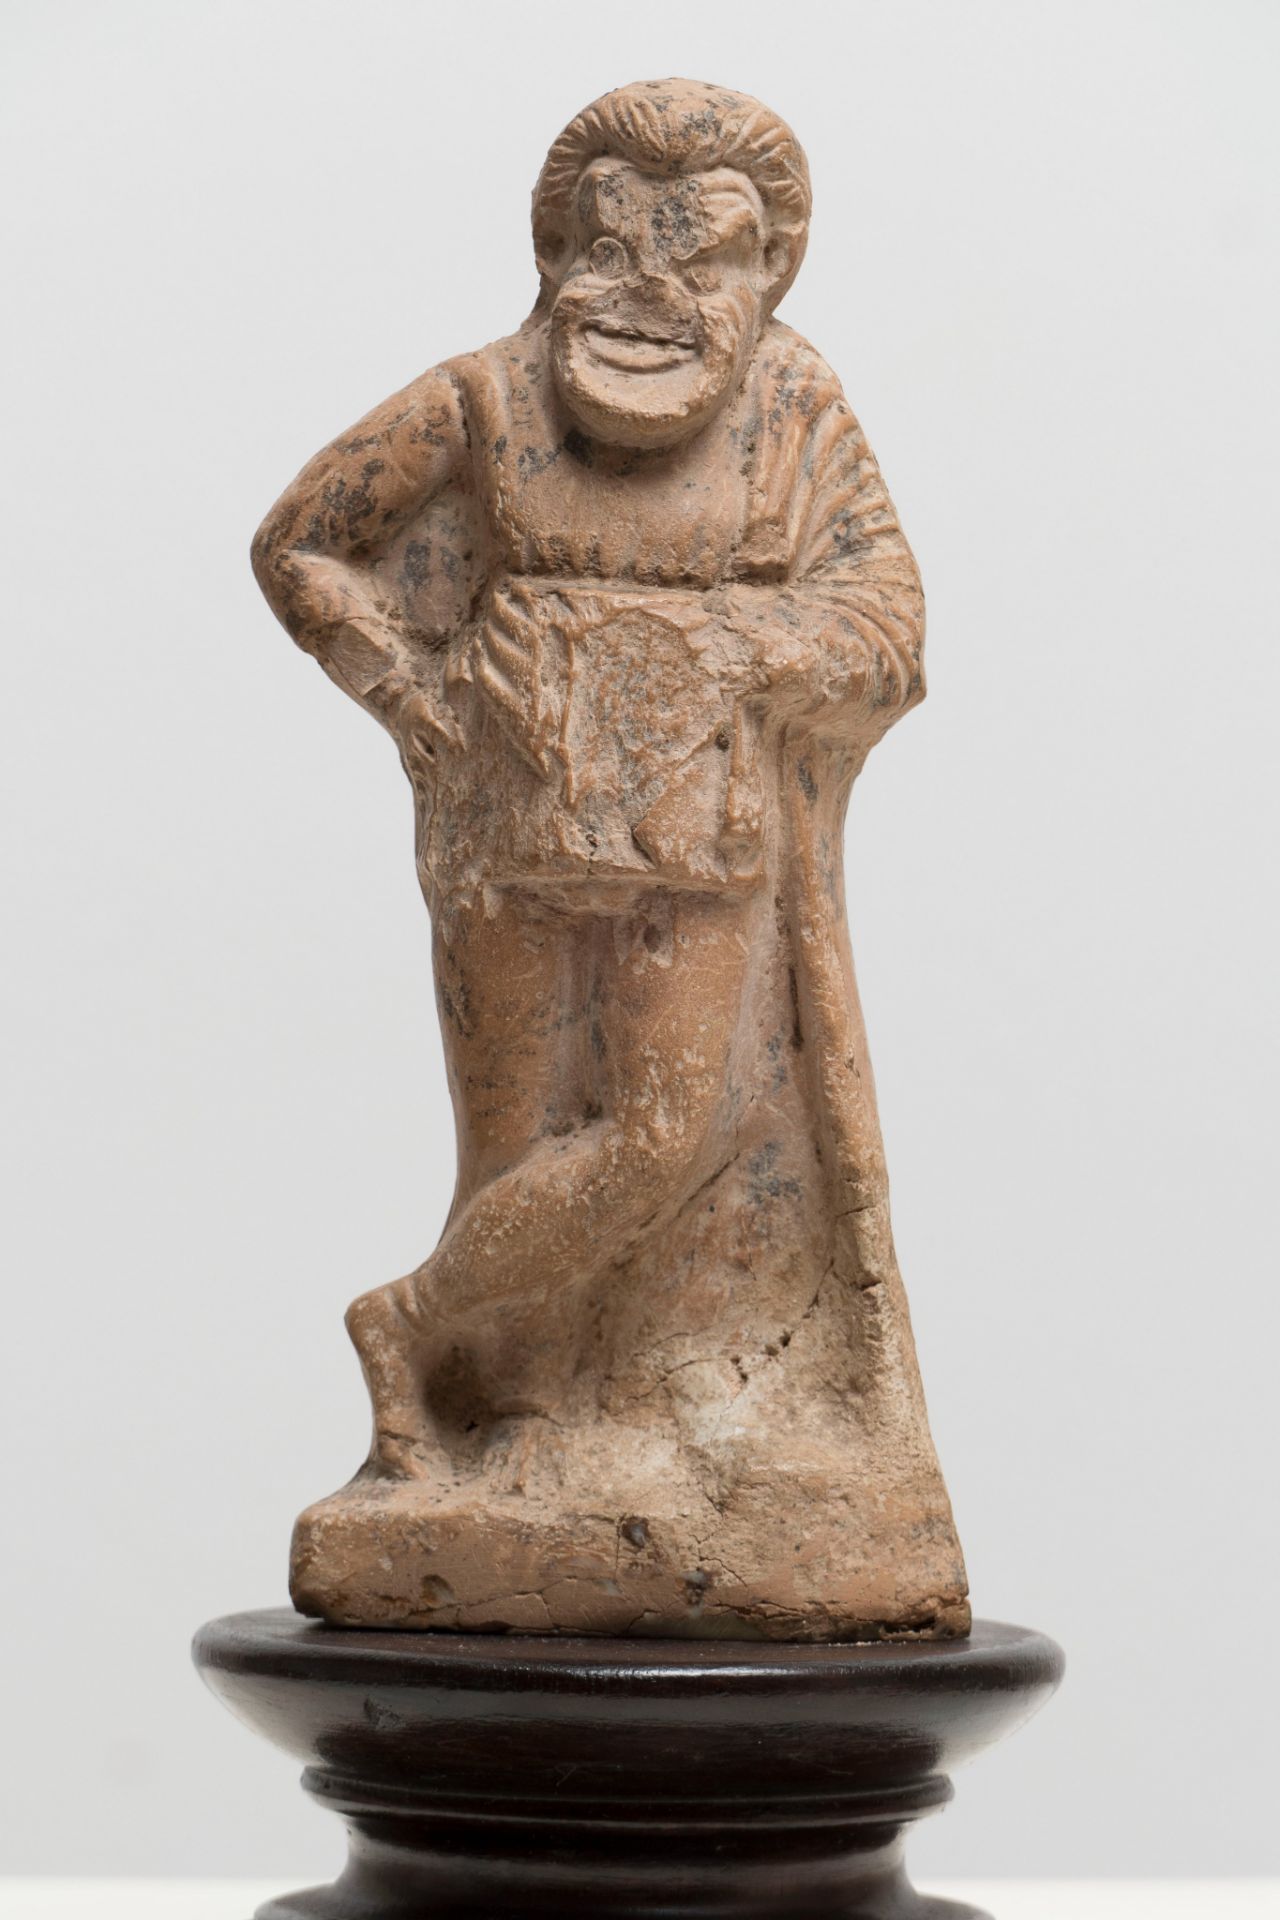 An antique terracotta figurine of a comic actor, Greece, ca. 350 B.C., H 15,2 cm - Image 2 of 7